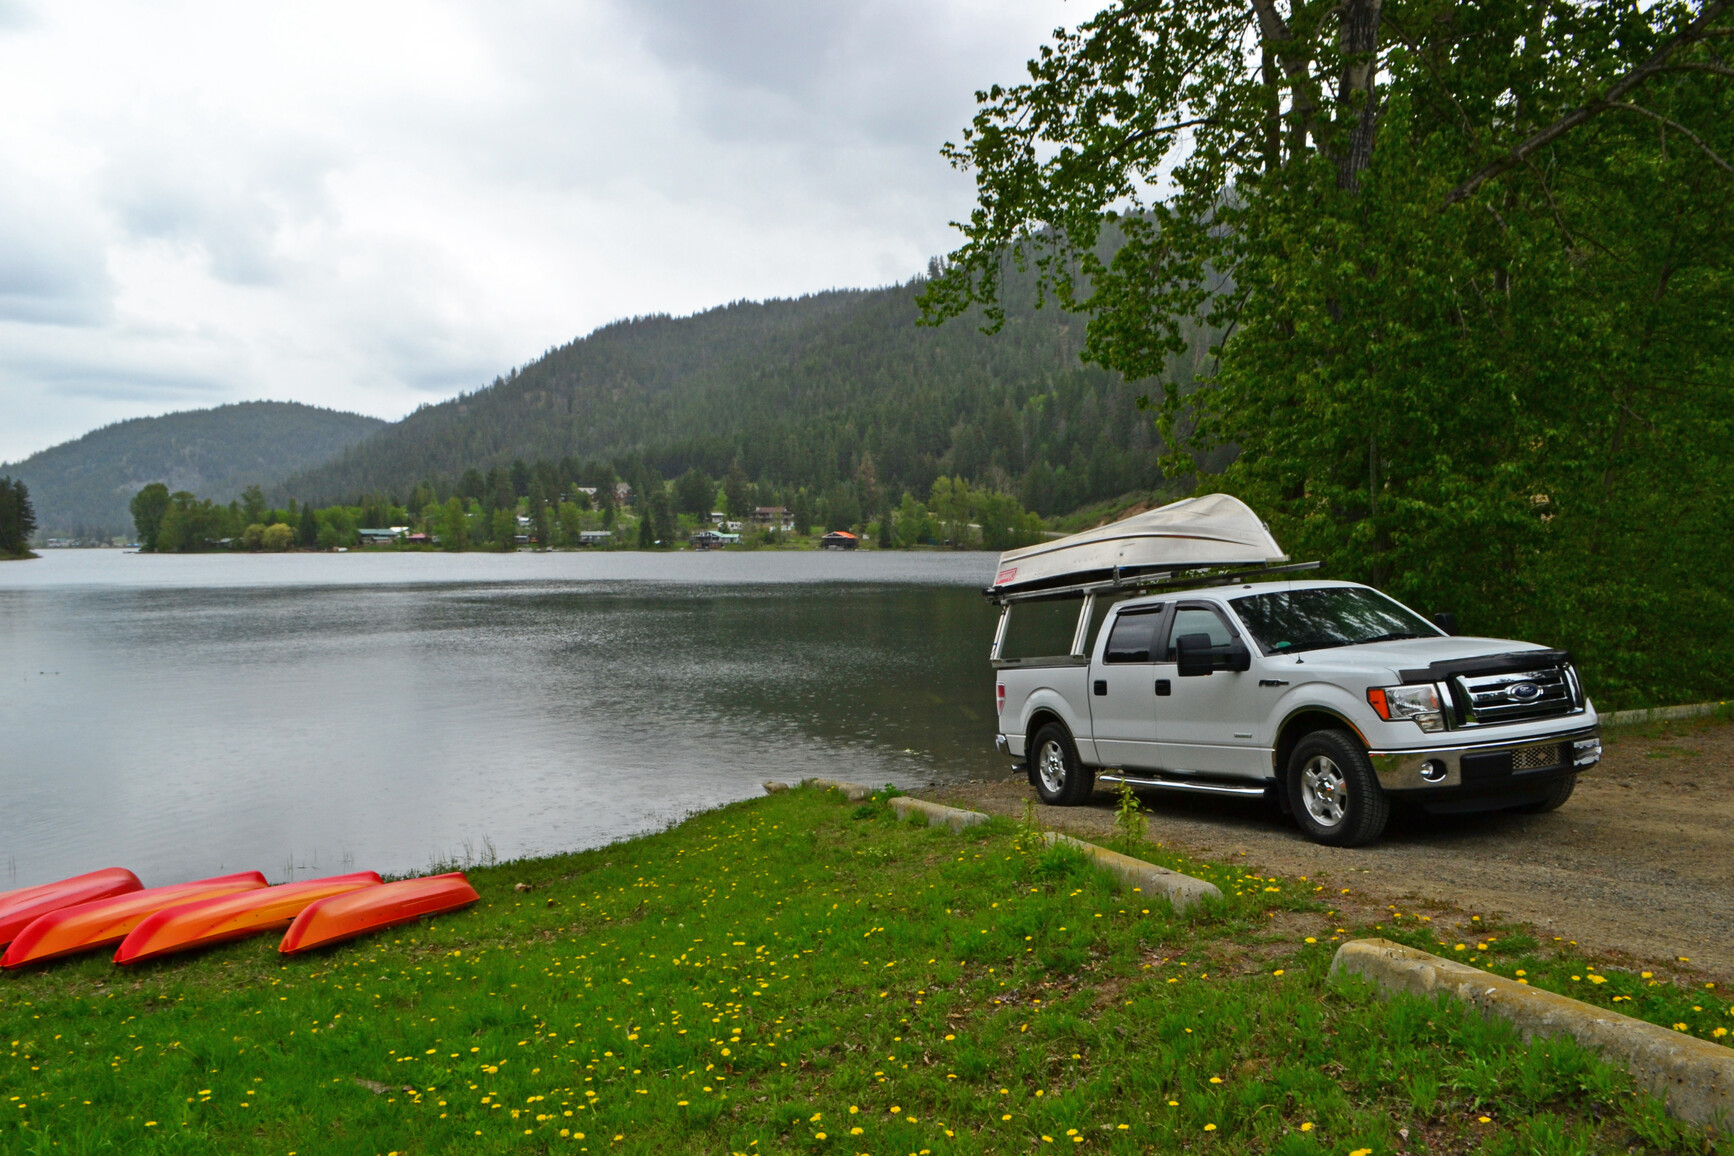 A truck preparing to launch a power boat at a boat launch on the lake.  On the grass in the foreground are 4 orange canoes. Trees, forest and mountains are in the background.